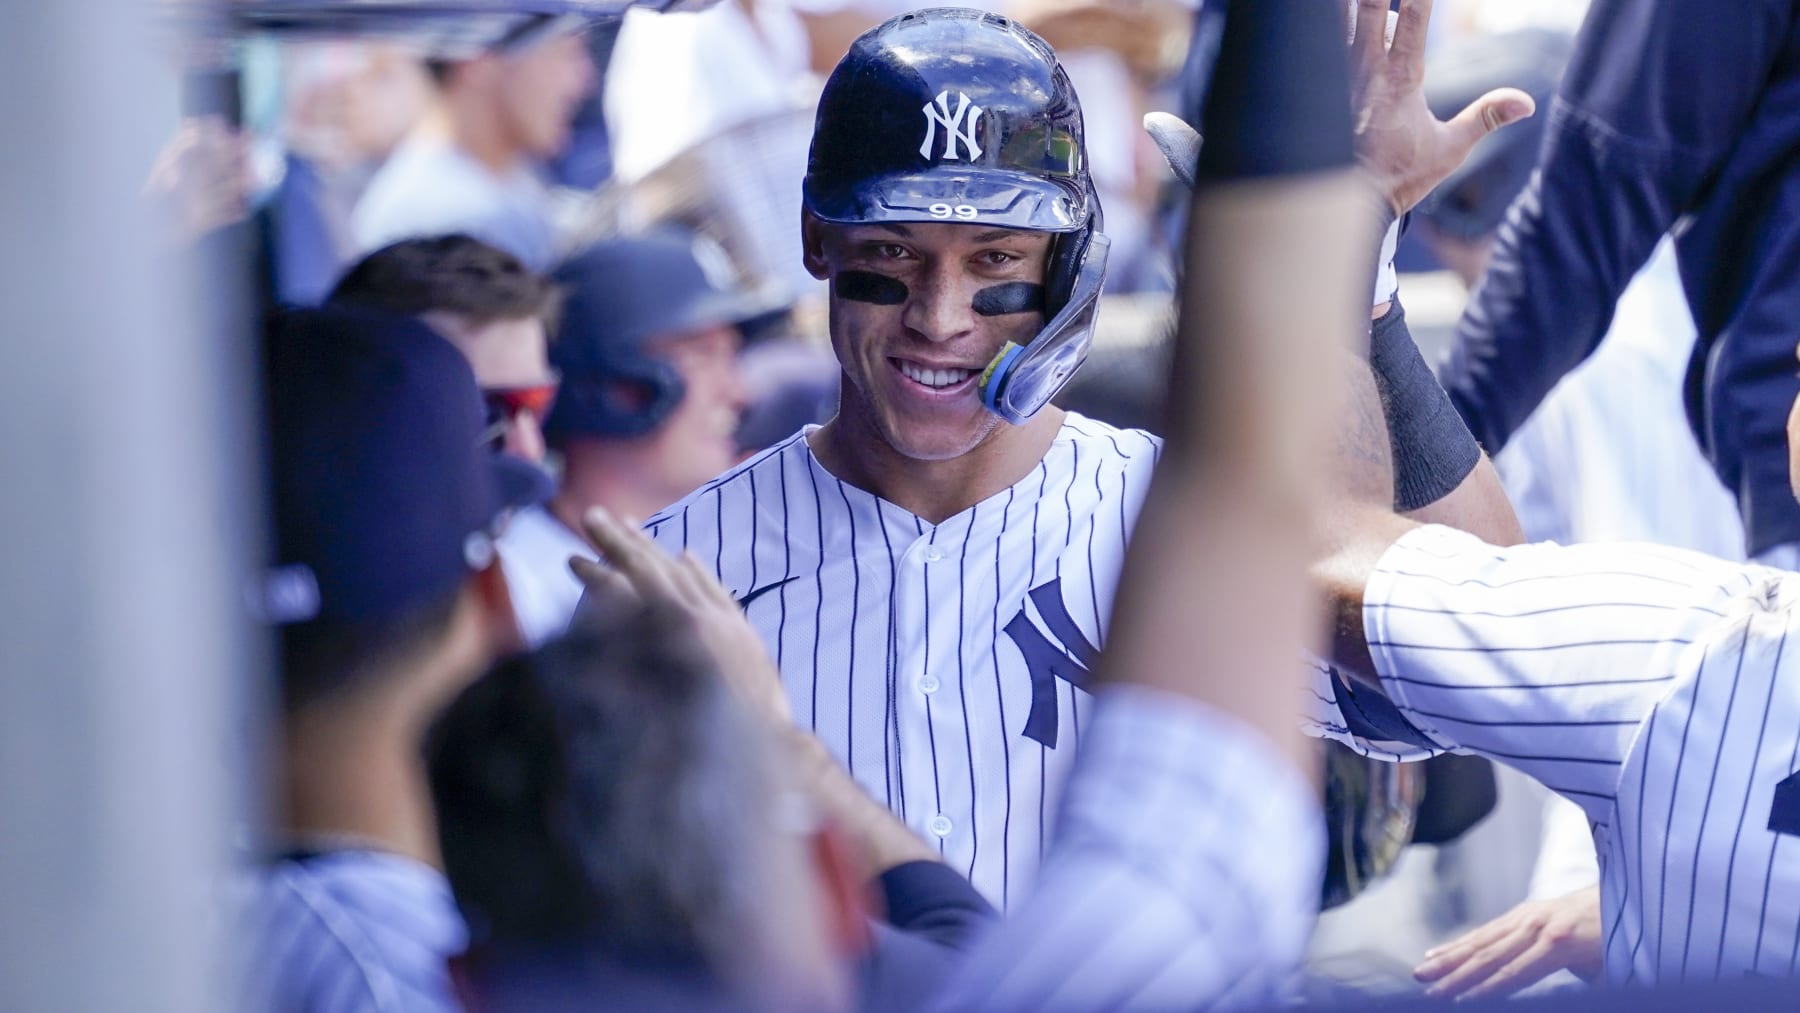 Aaron Judge has MONSTER day! Crushes TWO homers, collects 4 hits as he  inches closer to Triple Crown 